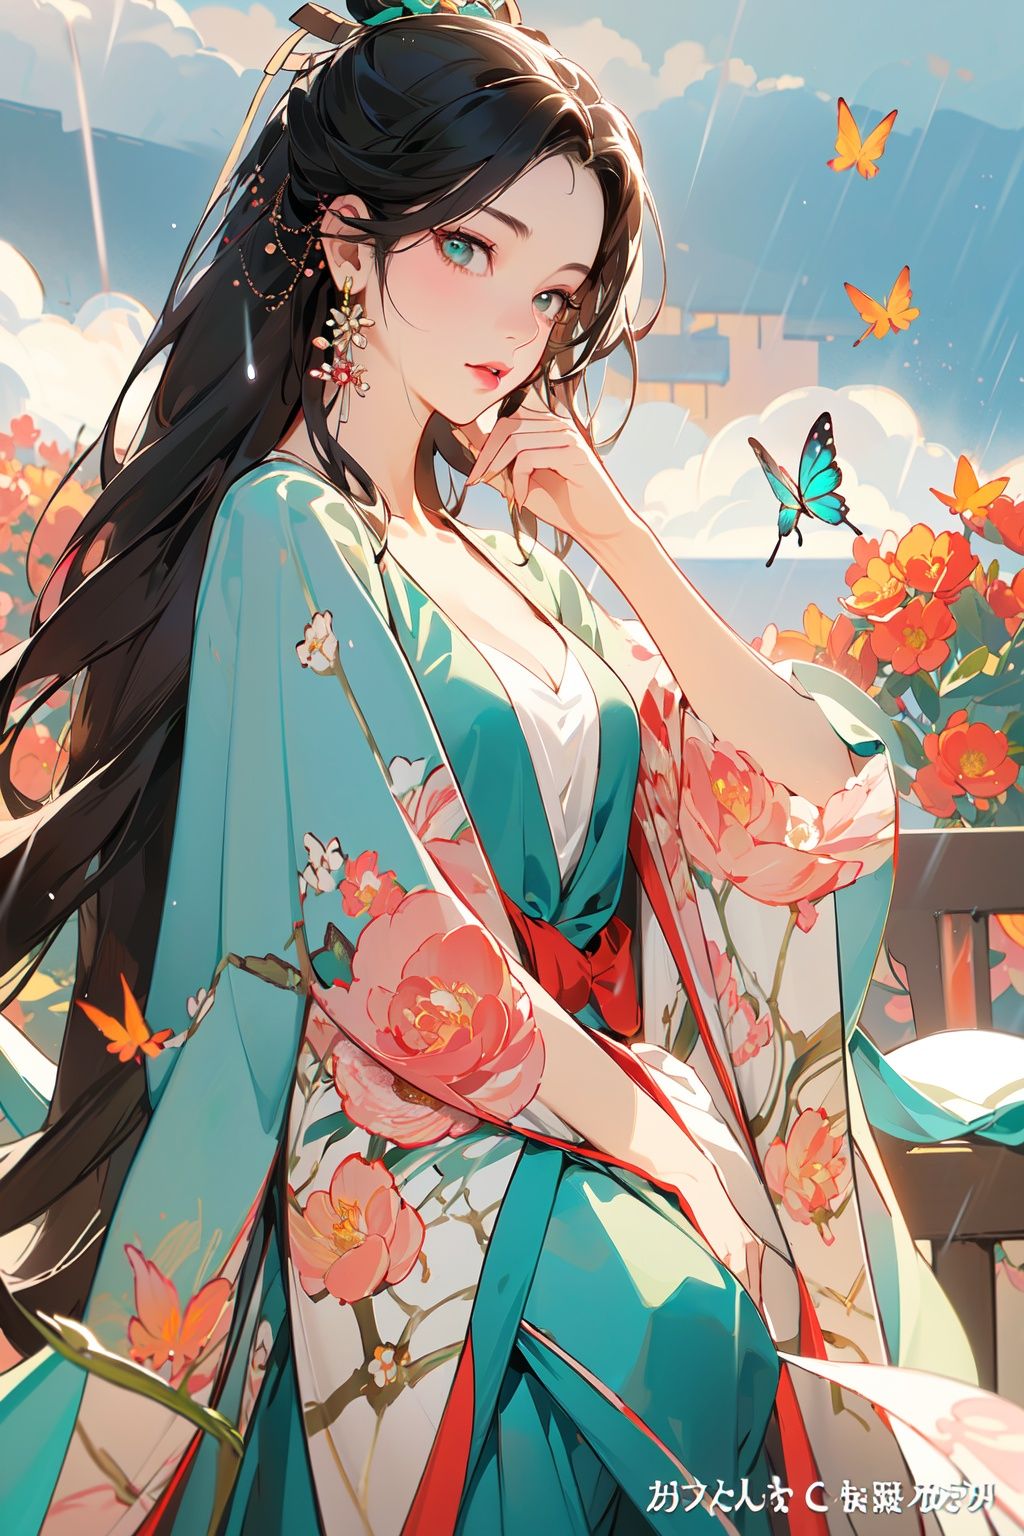 nsfw,(Masterpiece:1.2, high quality), (pixiv:1.4),cowboy shot, 1girl,Eyebrows like early spring willow leaves, often with rain hate cloud sorrow; Face such as peach blossom in March, hidden amorous month. Thin waist curl, constrained yan lazy warbler languid; Sandalwood mouth light, seduce the bee crazy butterfly chaos. Enchanting jade speech, beautiful jade fragrance. <lora:Chinese style_20230608163116-000018:0.8>